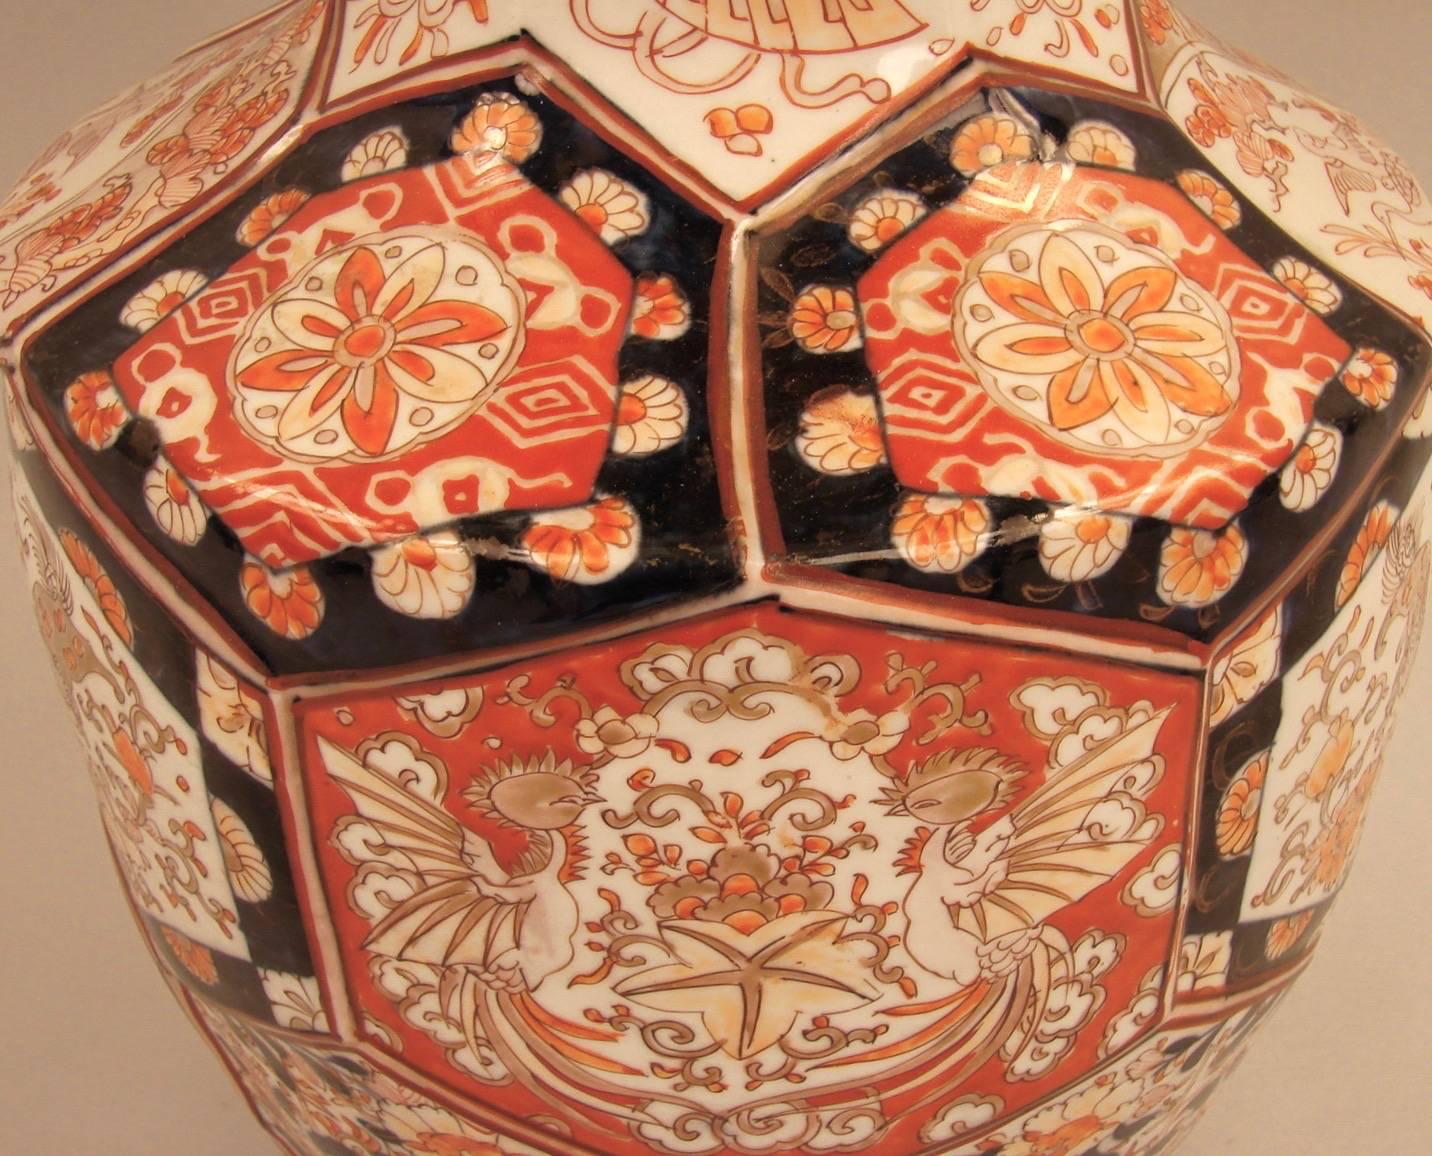 A large Imari Meiji period vase of faceted baluster form with a flaring lip, decorated in typical oranges and dark blues.